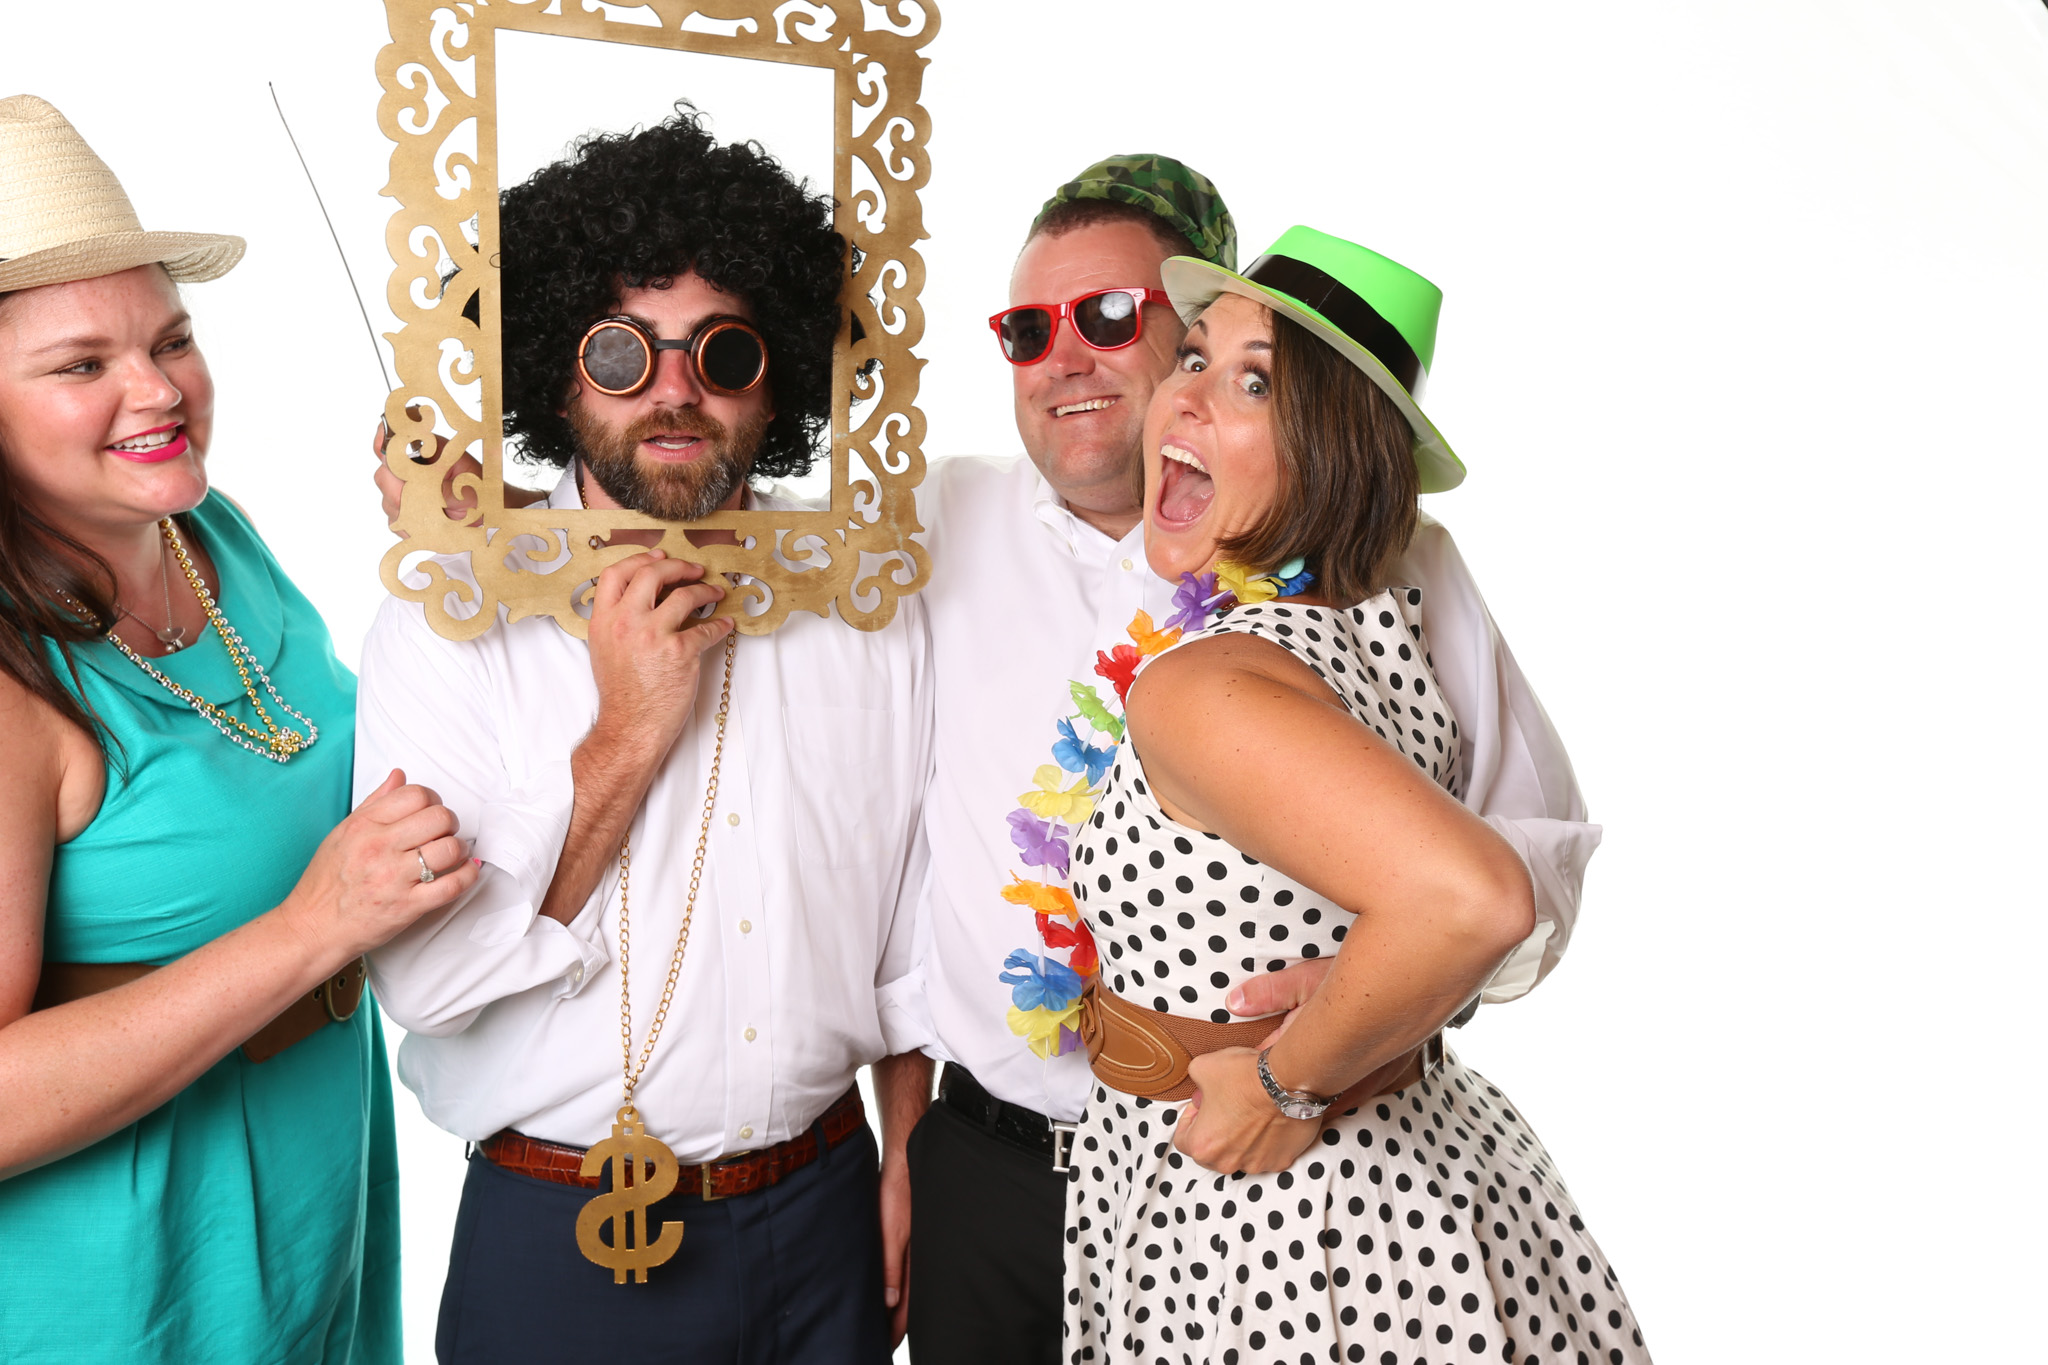 Guest at wedding in Asheville, NC using Forge Mountain Photography's photo booth. Guest are psing on a completely white background with no shadows. They are using all sorts of props like viking helmets, fake beards, wigs, and musical instruments.